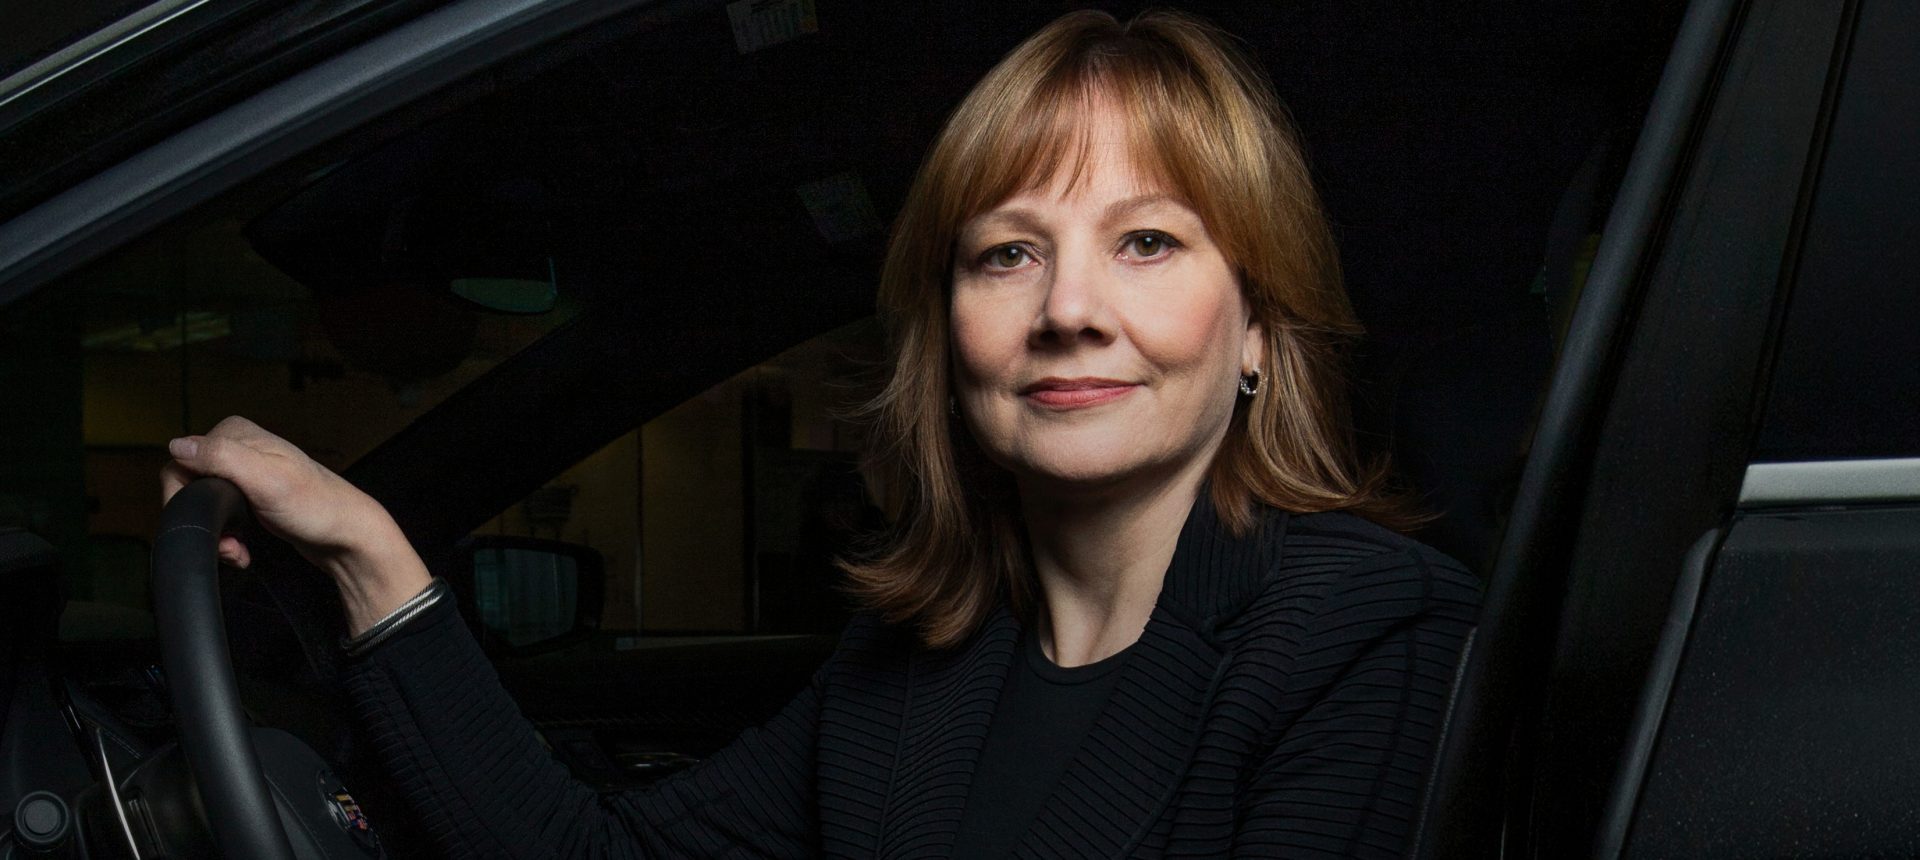 General Motors CEO Mary Barra is steering the way to an allelectric future